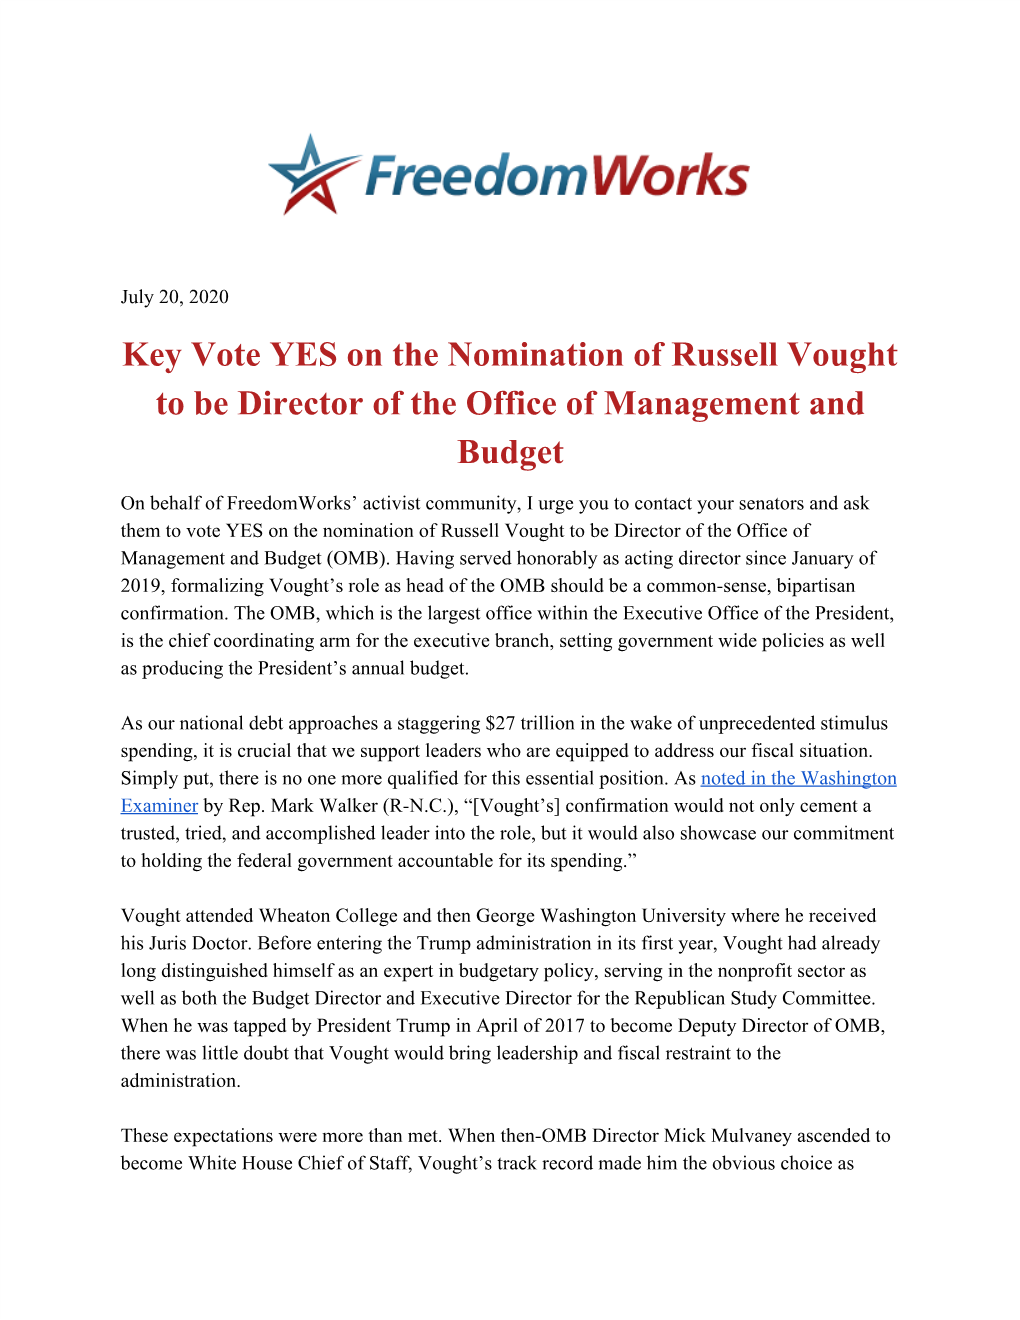 Key Vote YES on the Nomination of Russell Vought to Be Director of the Office of Management And